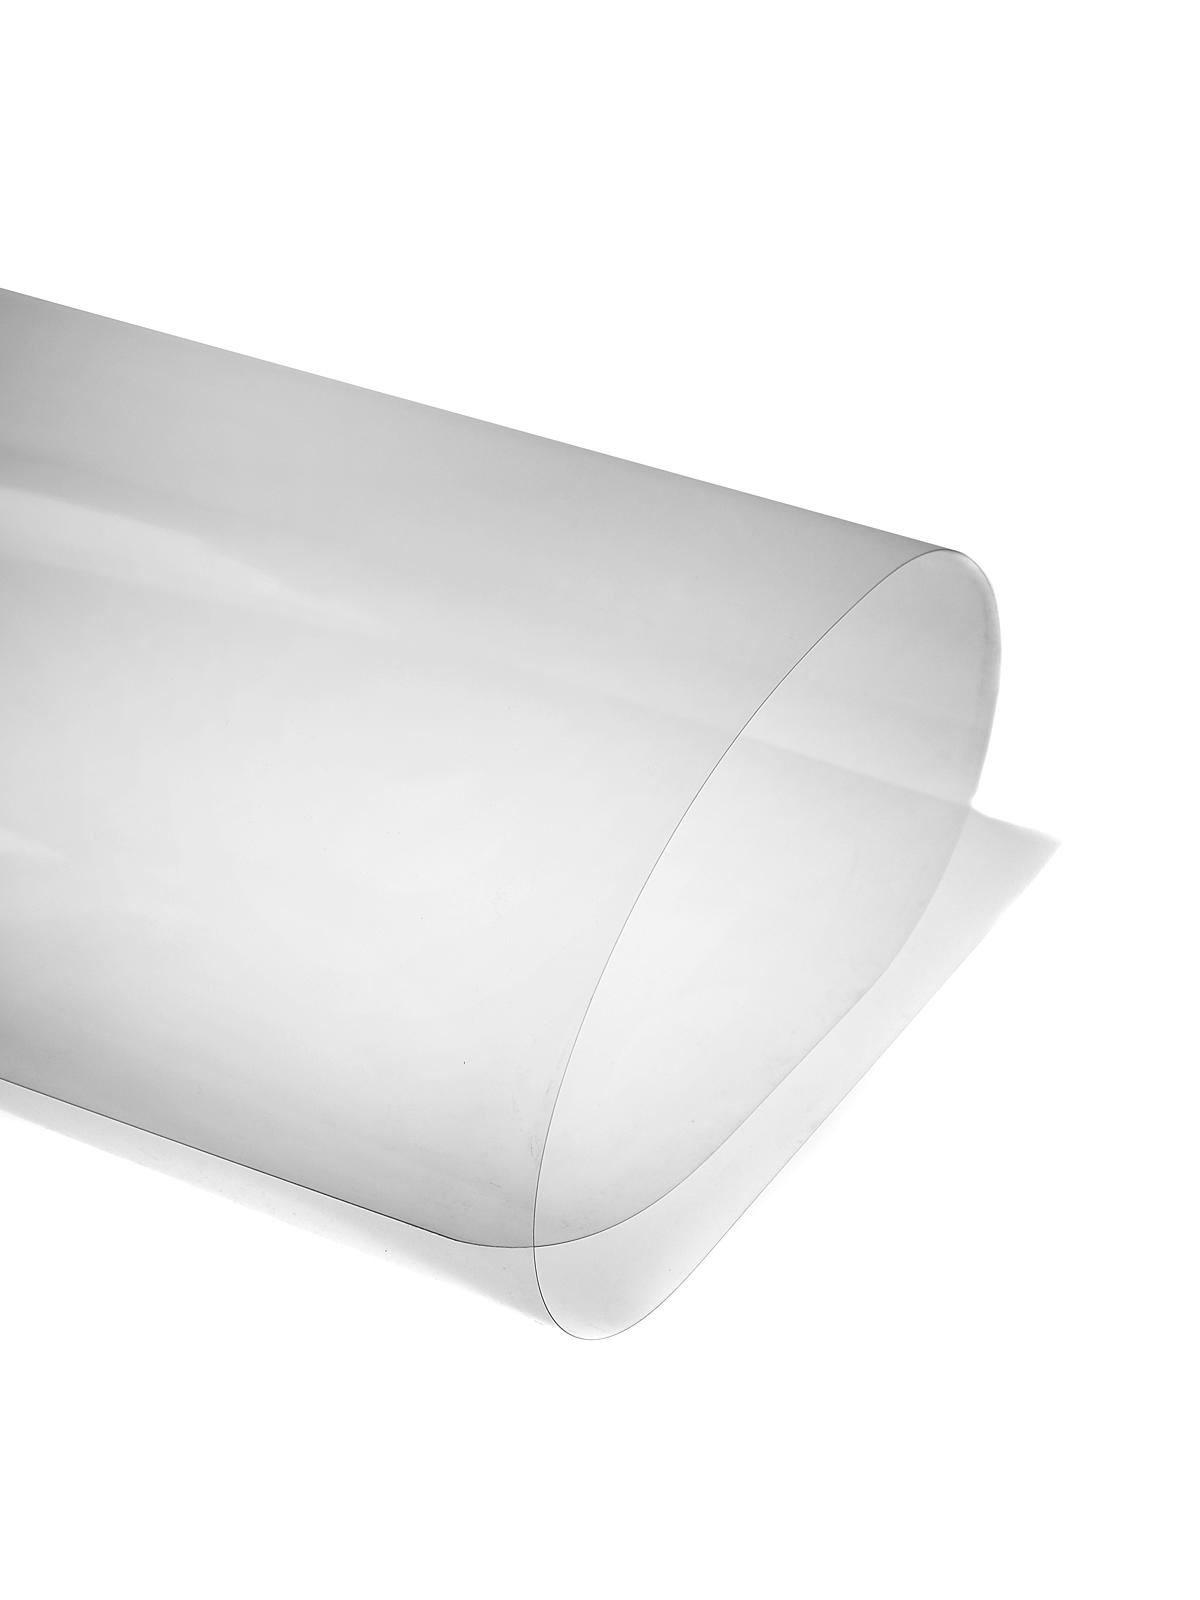 Clear-lay Plastic Film 0.003 20 In. X 50 In. Sheet